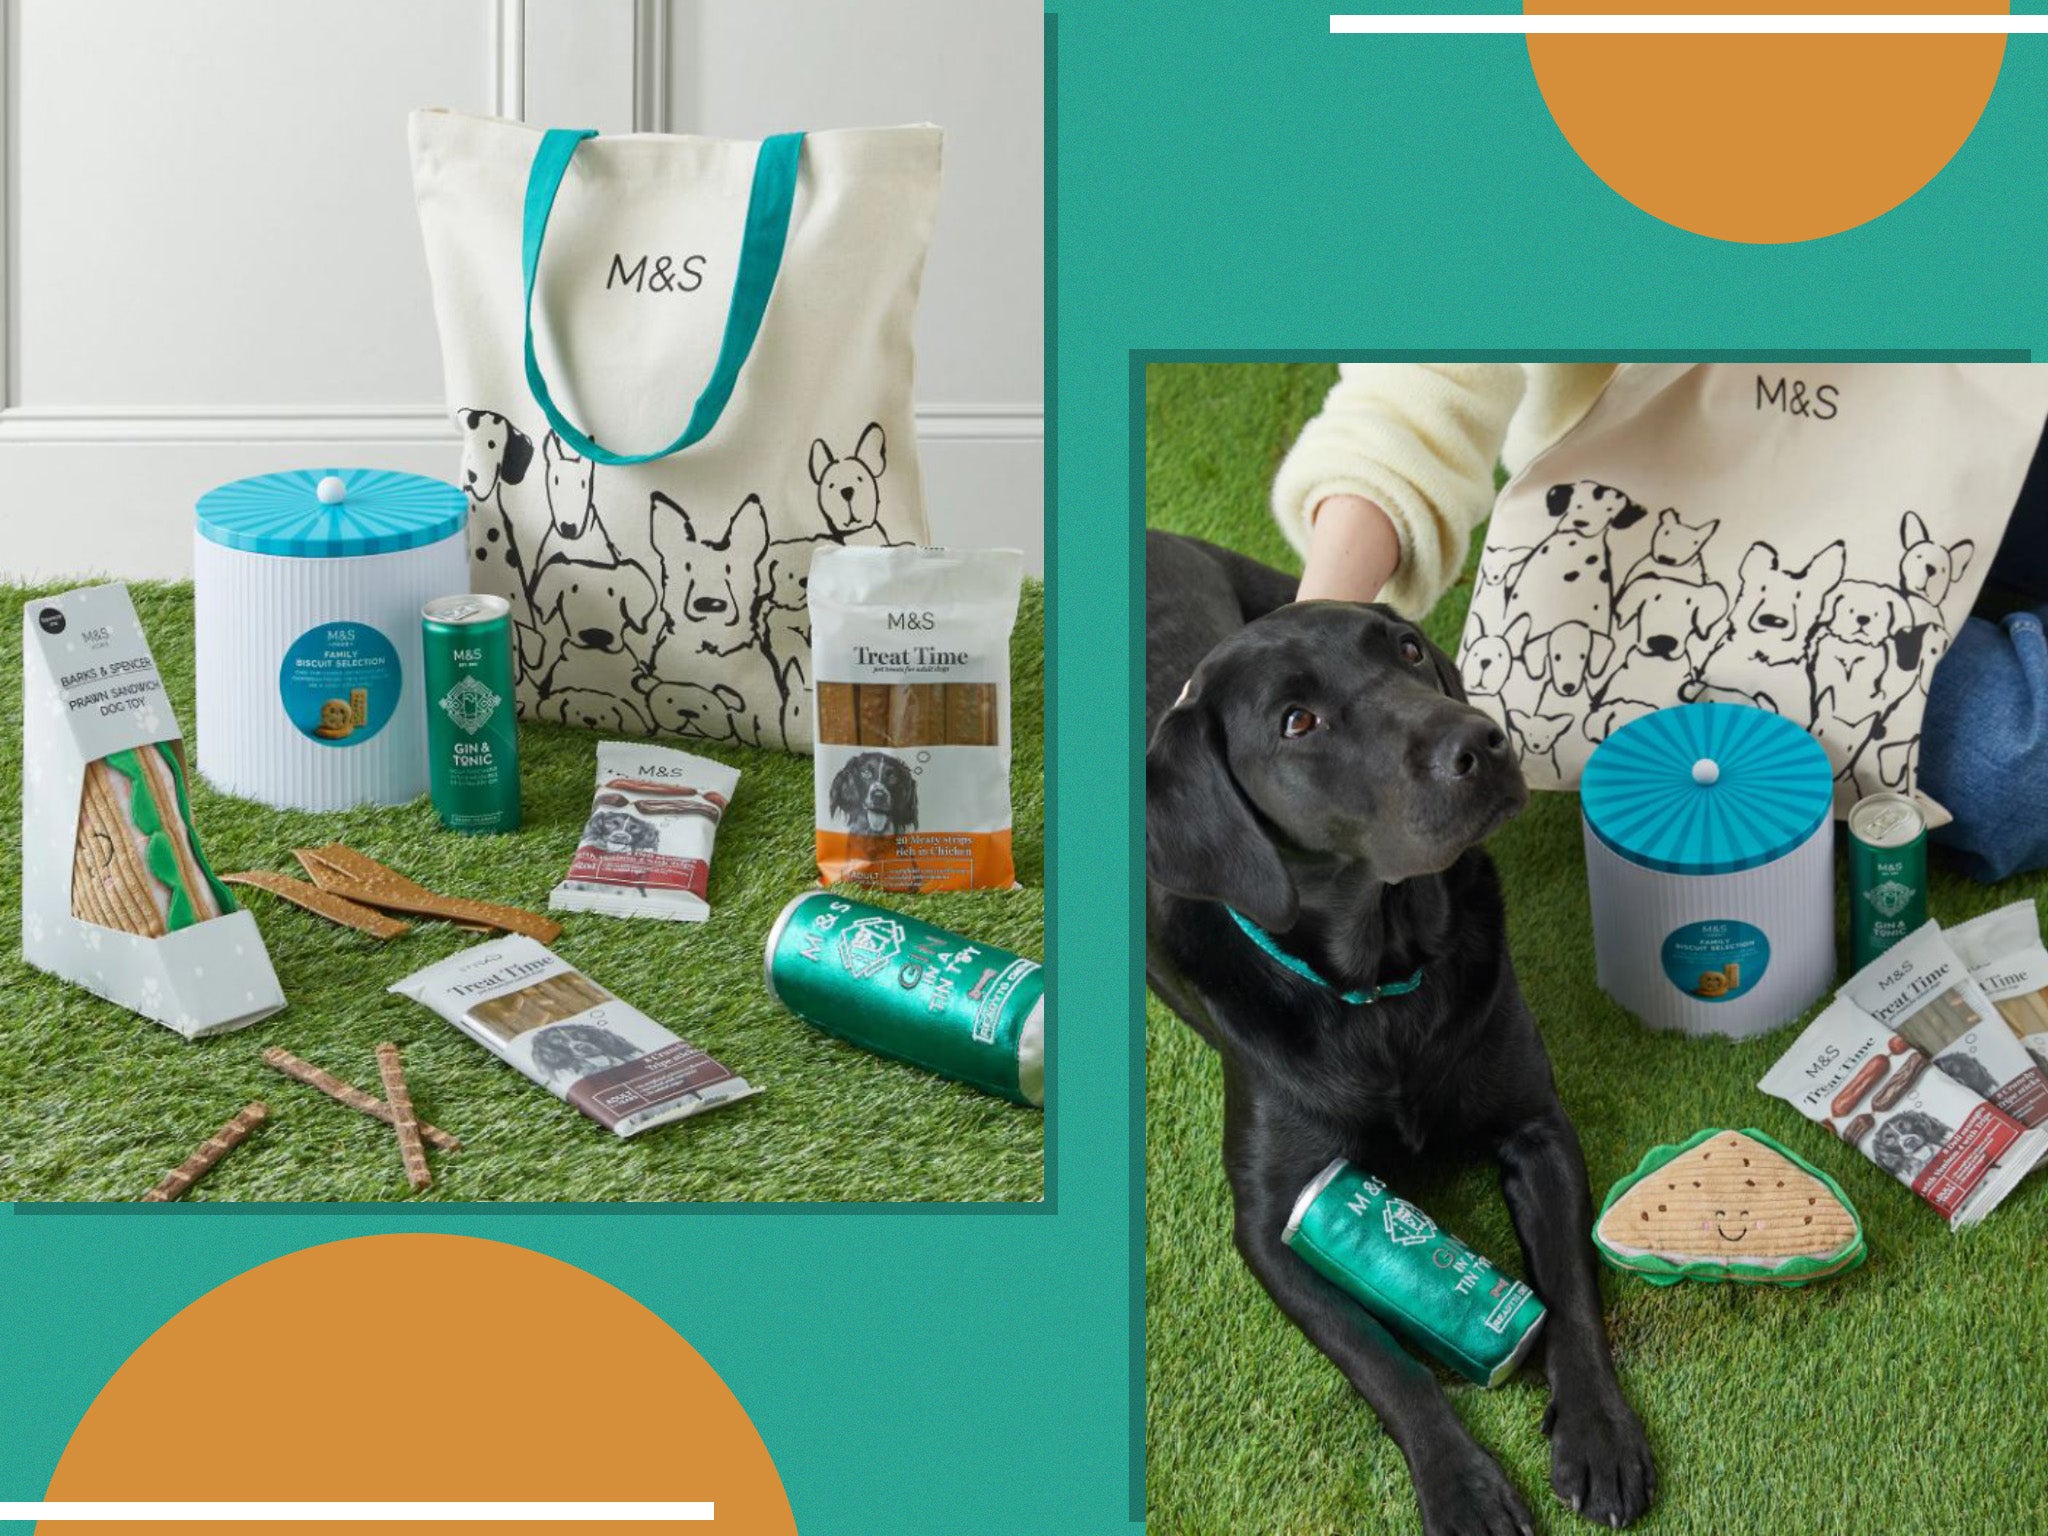 Don’t forget about your four-legged friend when planning the perfect picnic